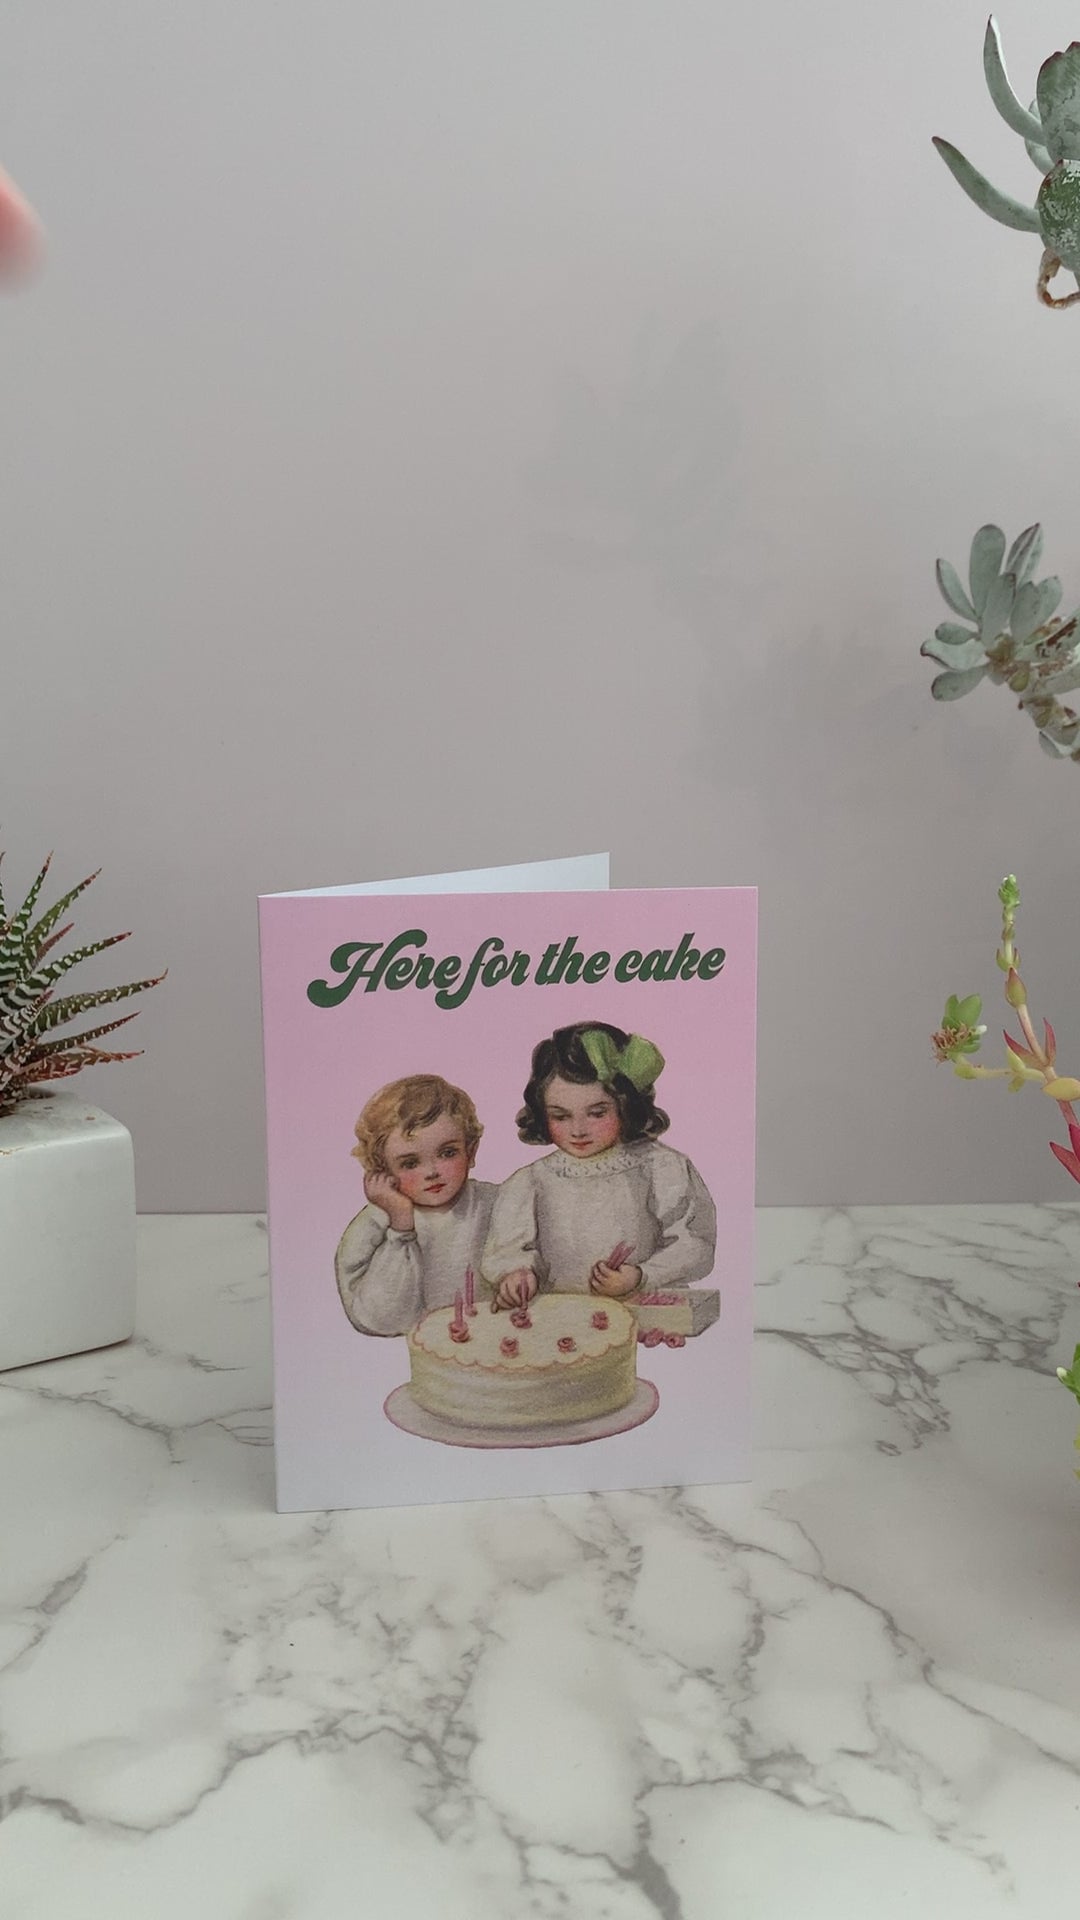 All purpose greeting card. Can be used for celebrations, birthdays, weddings, anniversaries, or anything. Front of the card is light pink, with a vintage image of two children putting candles on a cake. Greeting says, "Here for the cake." Inside is blank.